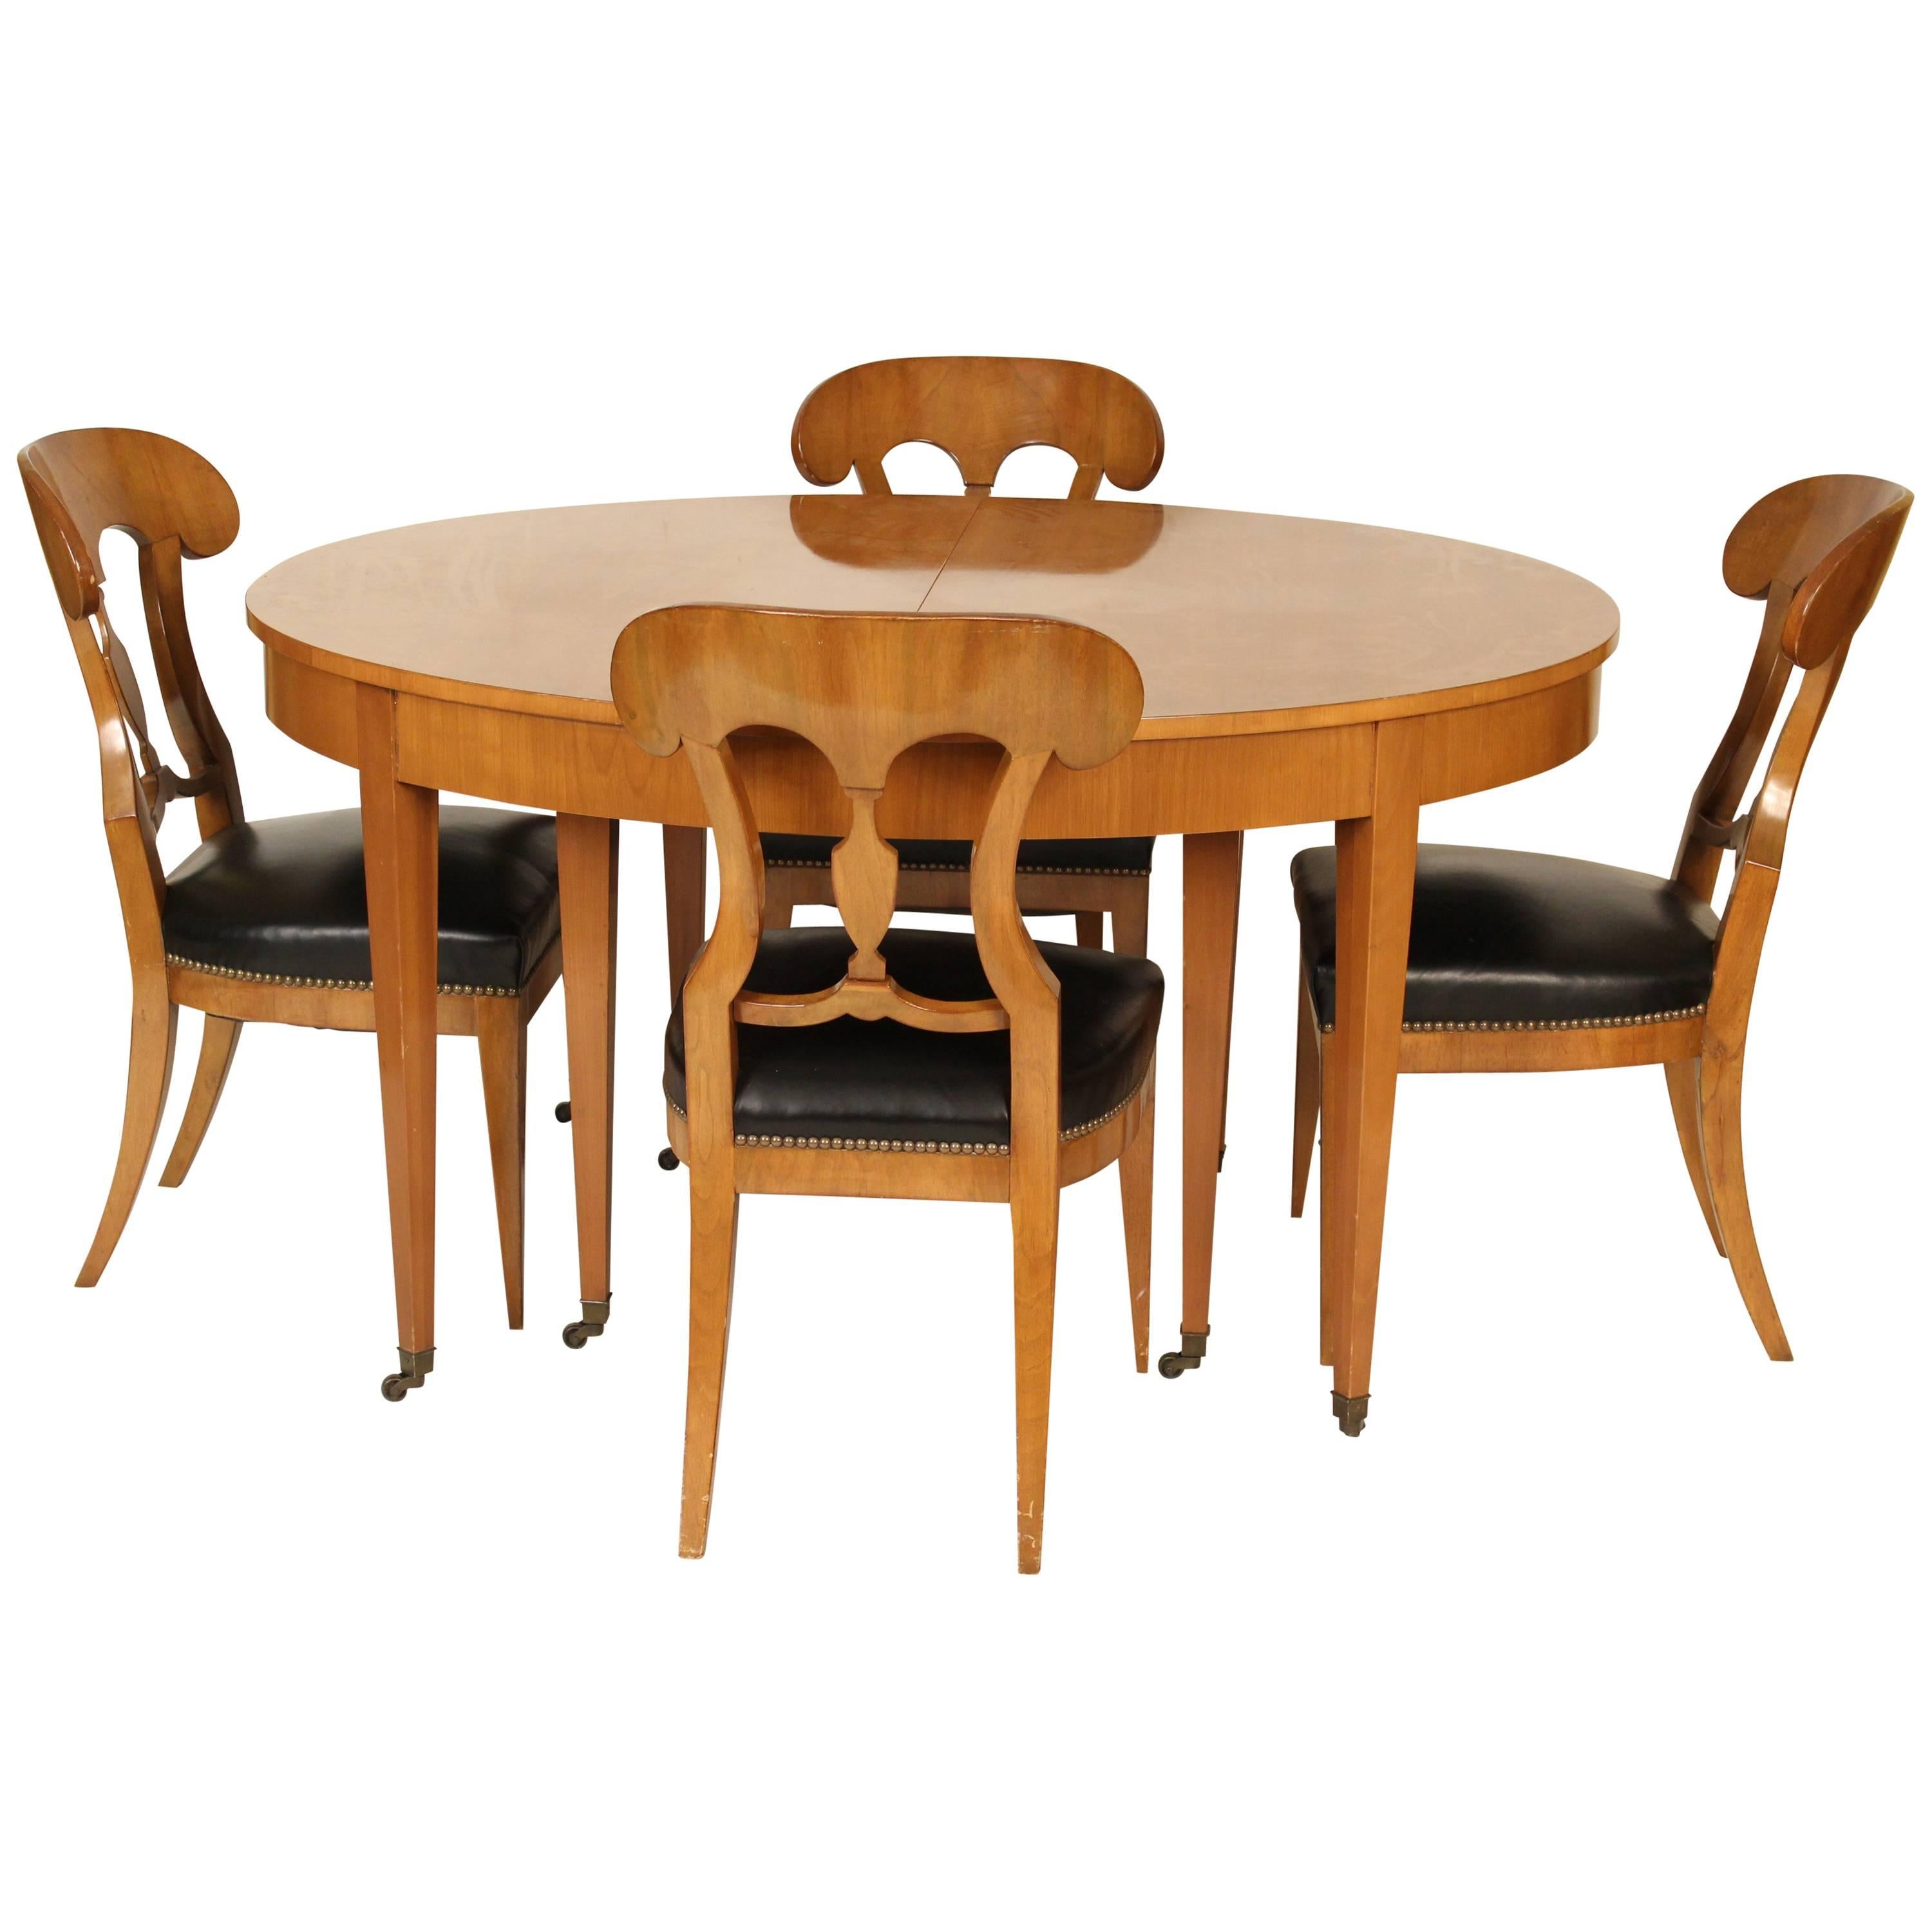 Biedermeier Style Dining Table by Baker and Four Chairs